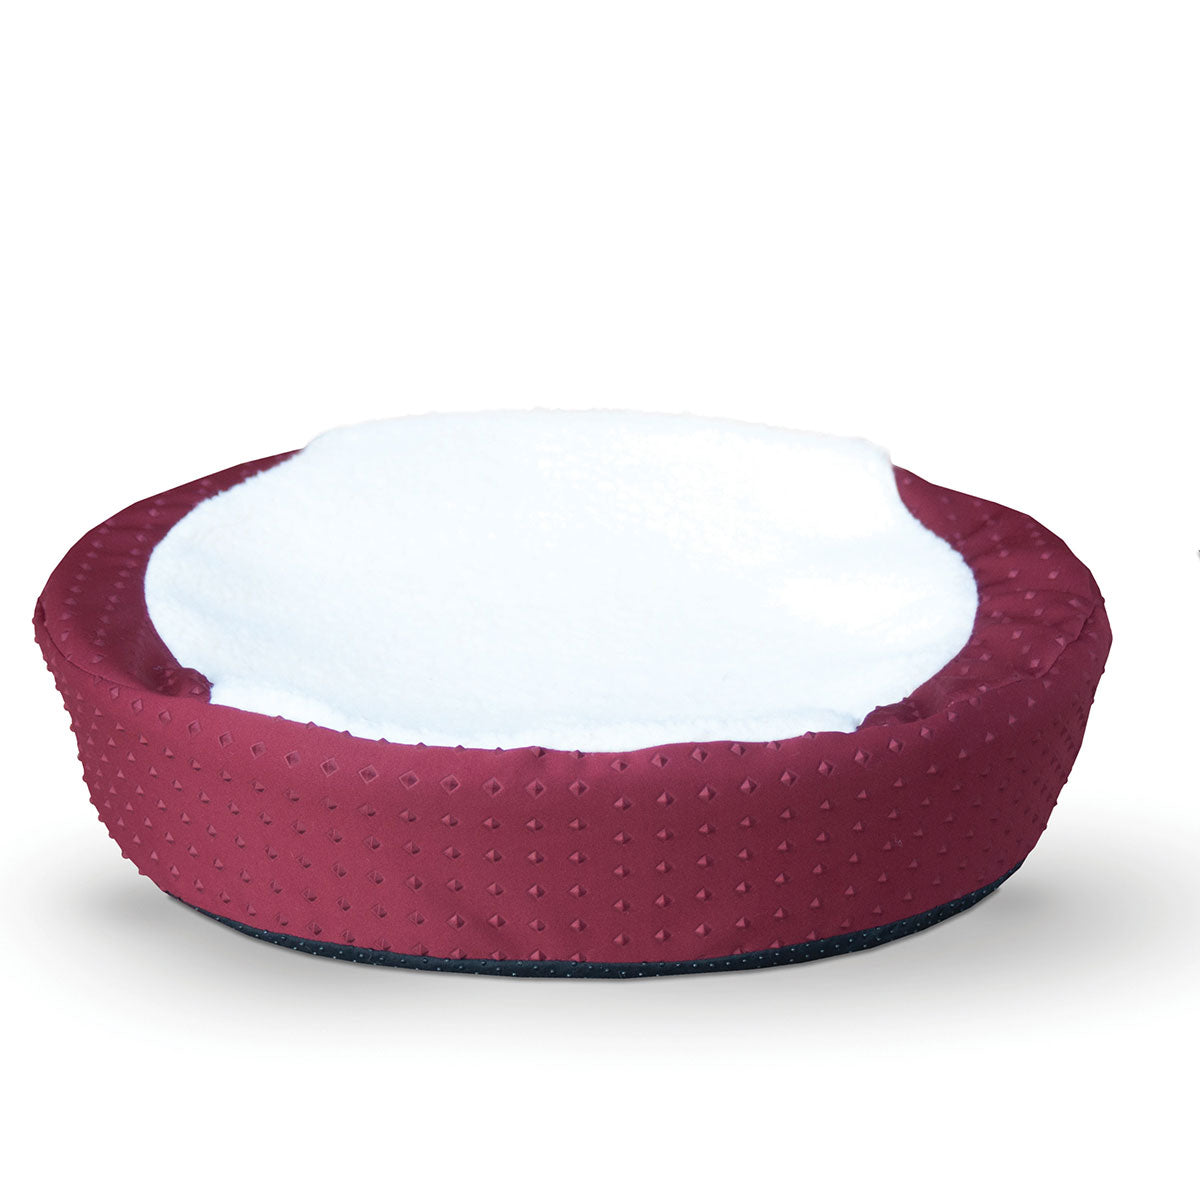 K&h Pet Products Kh7417 Ultra Memory Round Pet Cuddle Nest